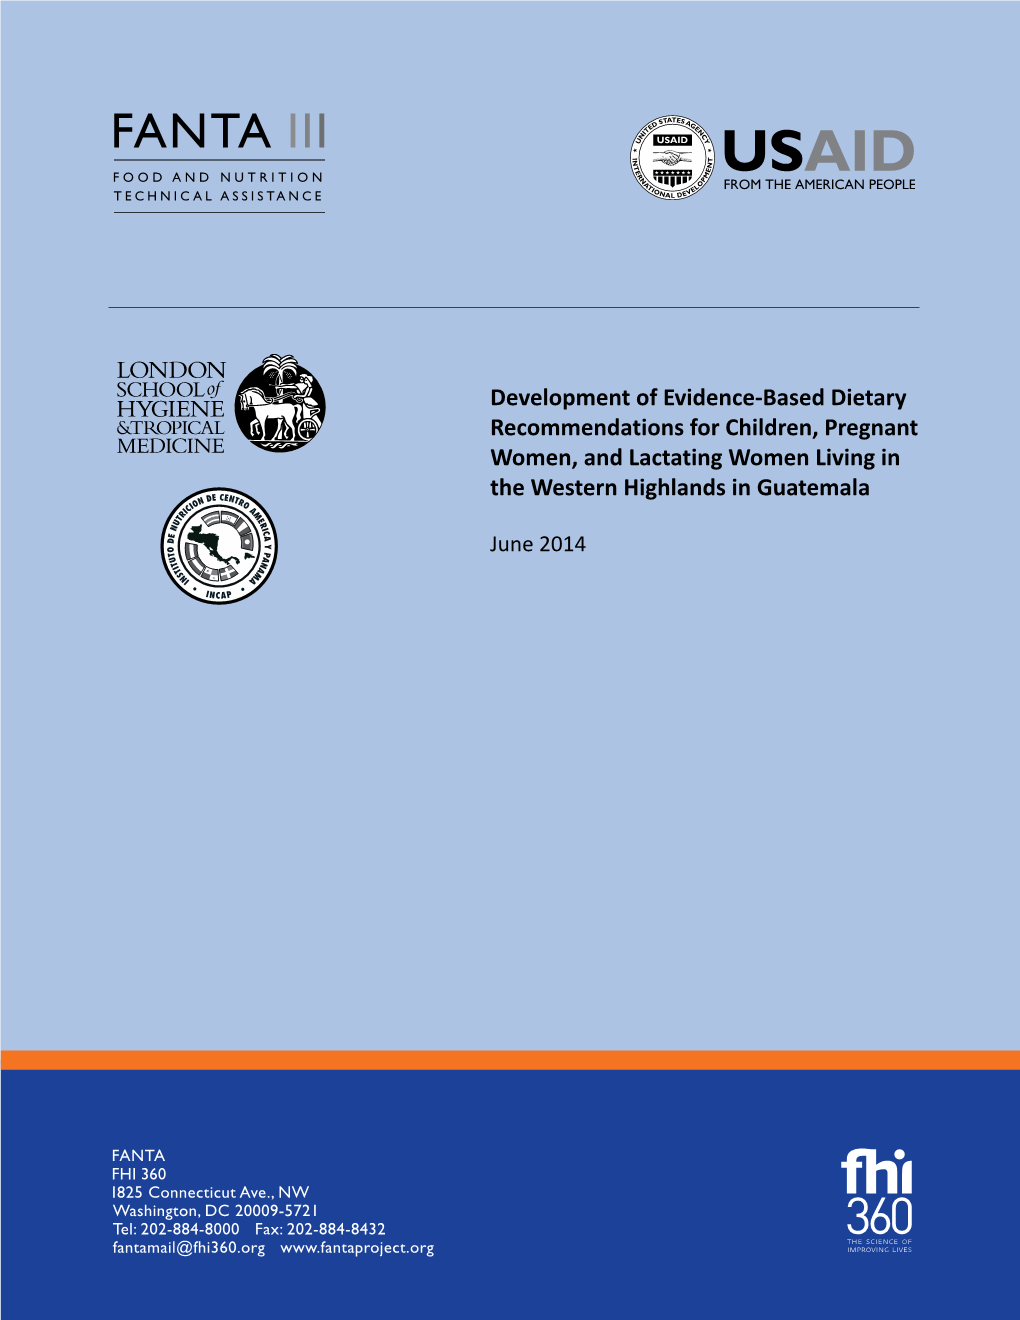 Development of Evidence-Based Dietary Recommendations for Children, Pregnant Women, and Lactating Women Living in the Western Highlands in Guatemala